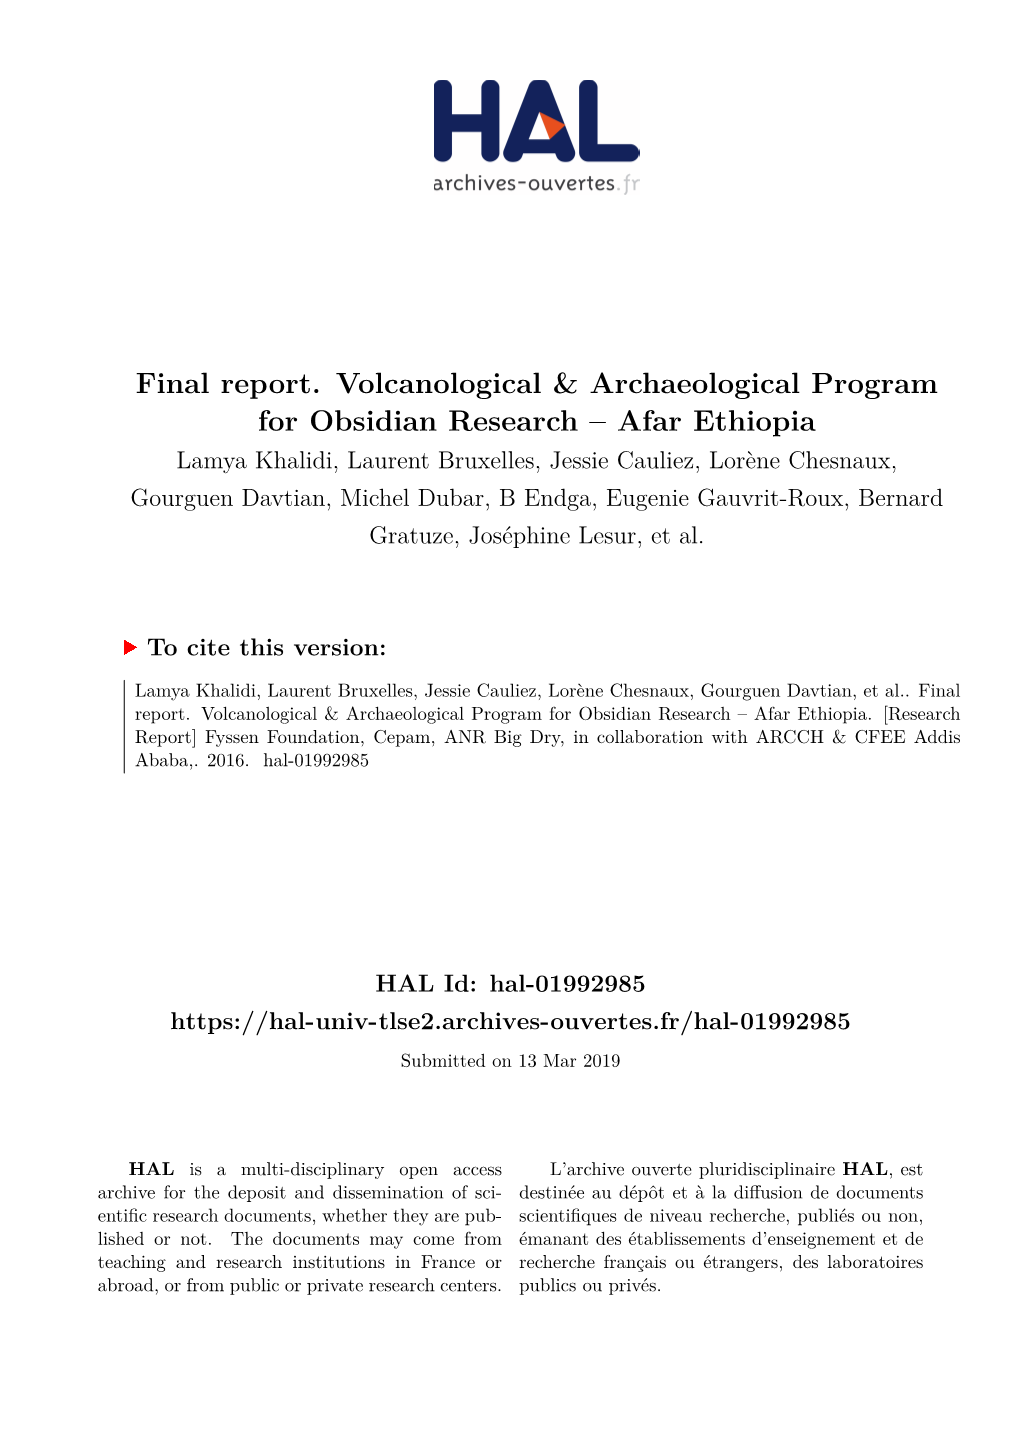 Final Report. Volcanological & Archaeological Program for Obsidian Research – Afar Ethiopia